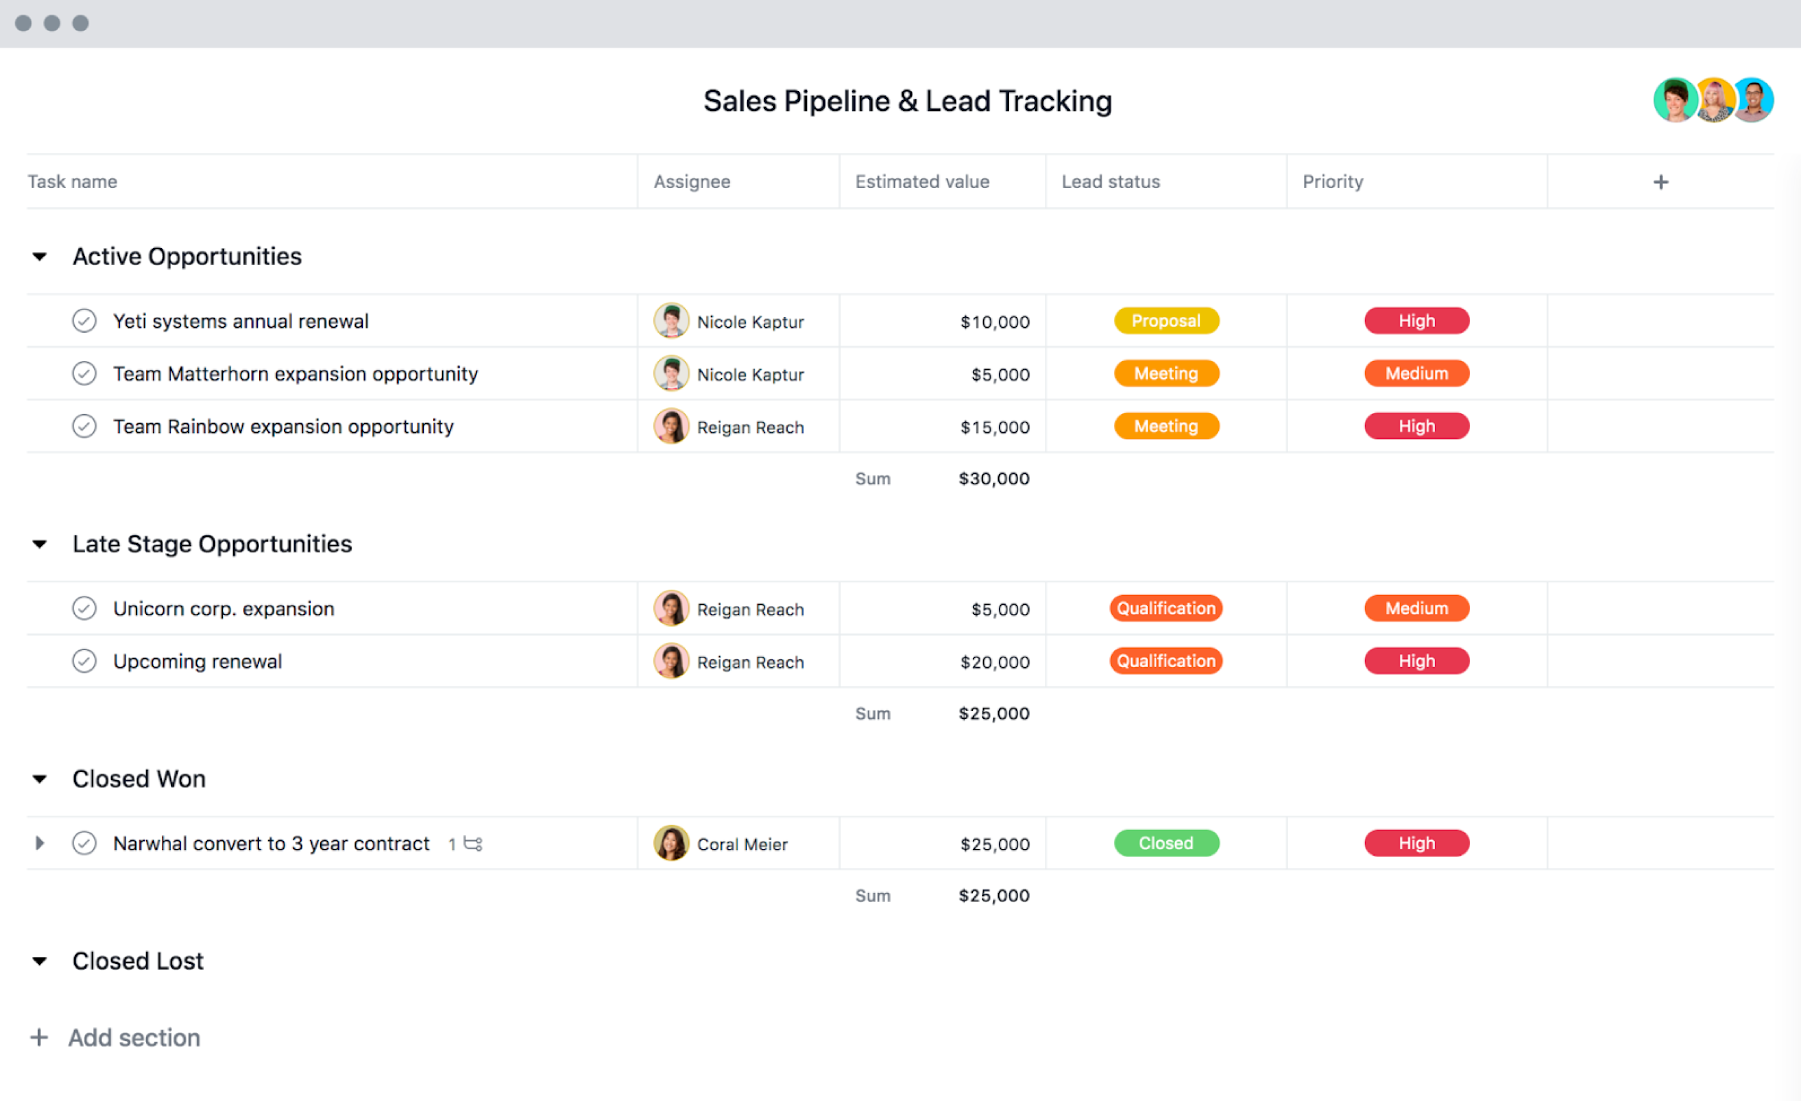 [Product UI] Sales pipeline template in Asana, spreadsheet-style view (Lists)